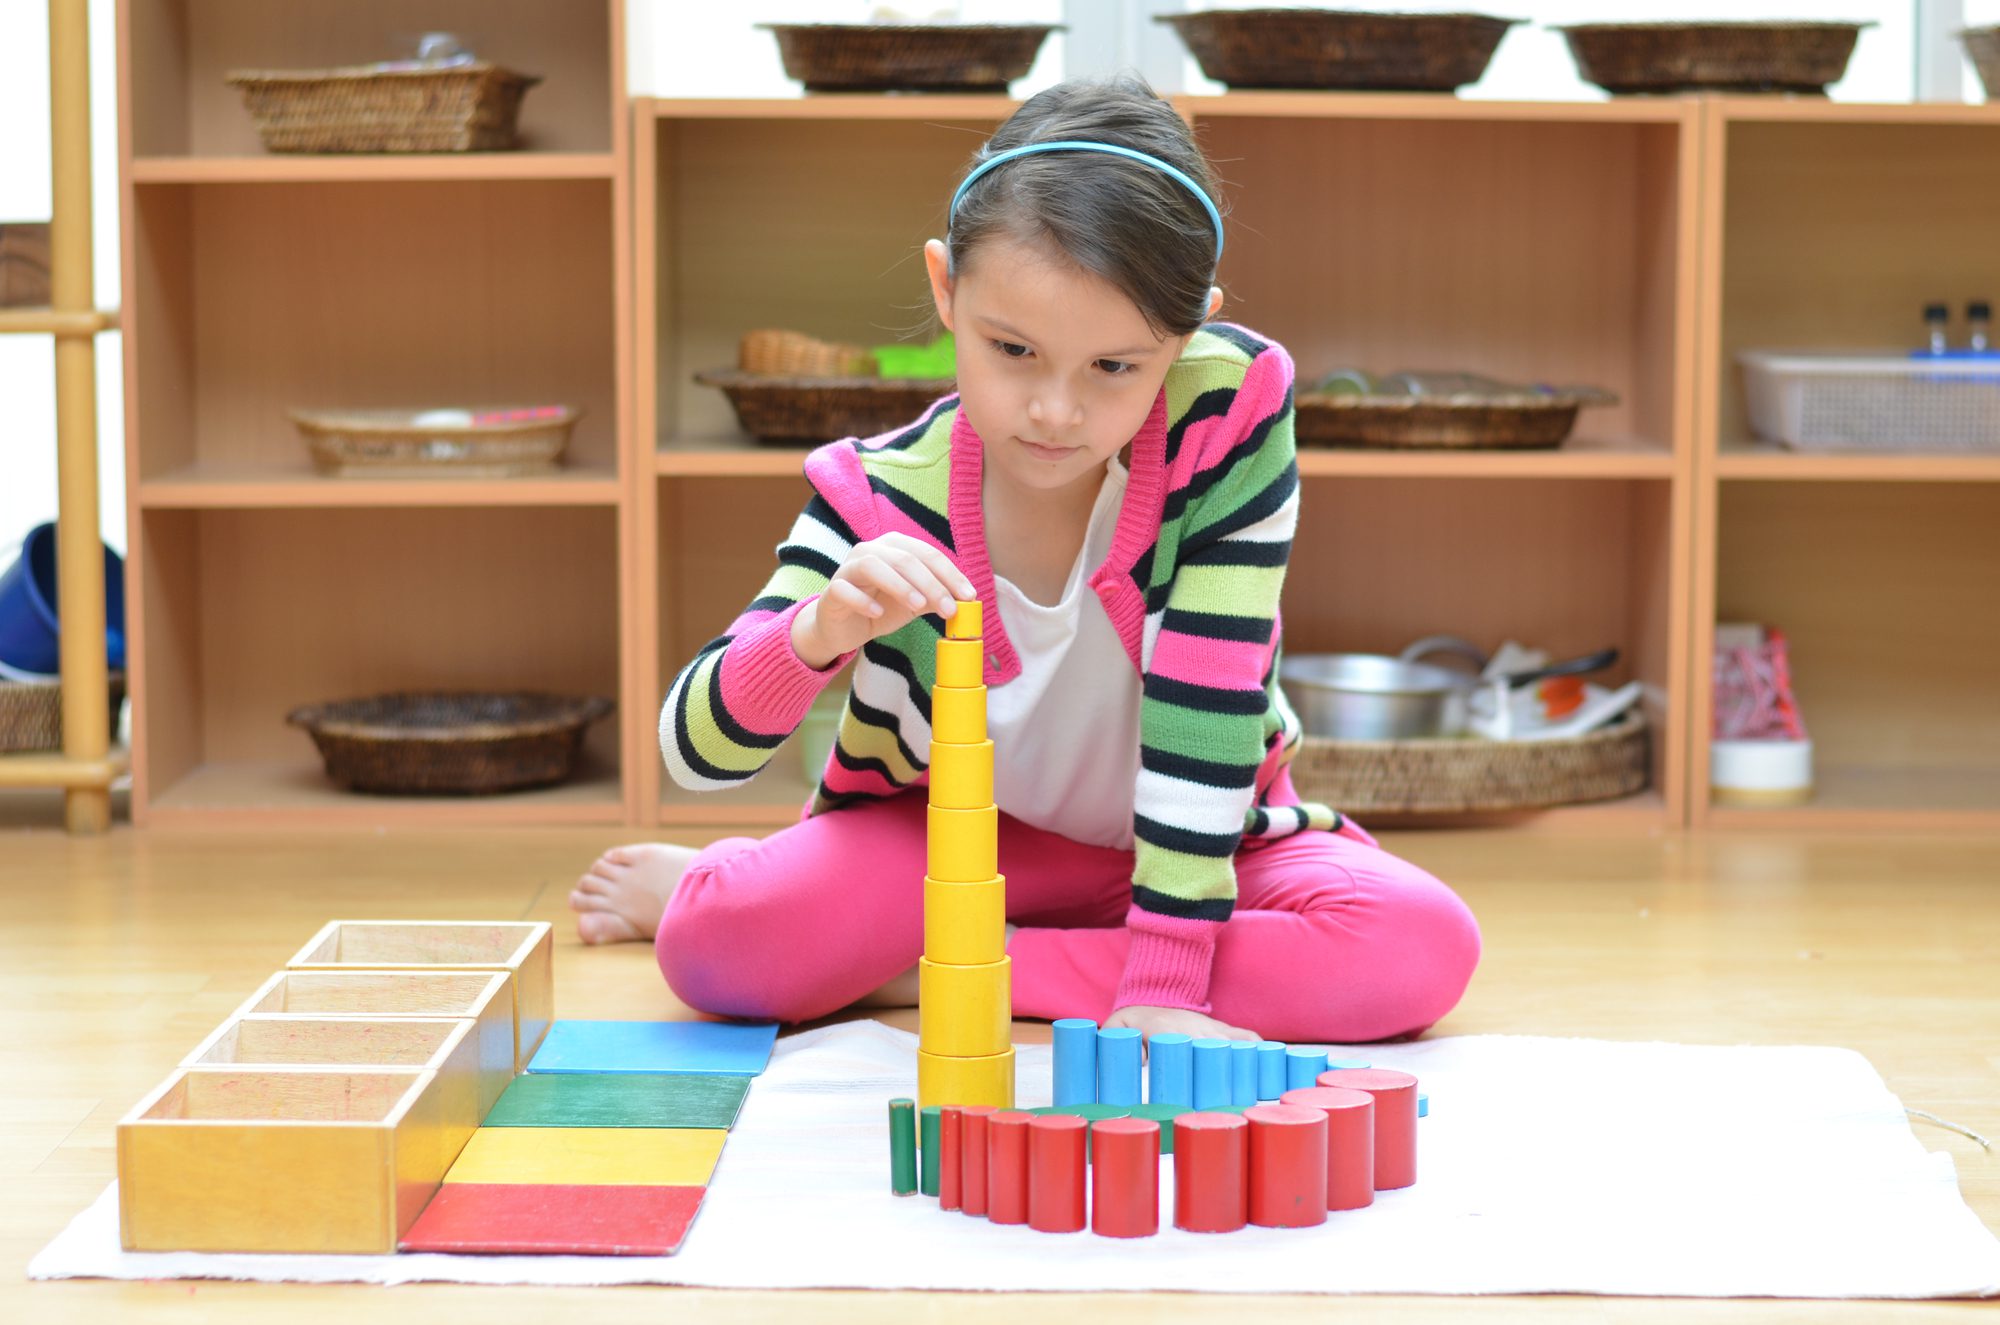 A young girl stacking different colored blocks at Meadow Montessori School in South Richmond, TX